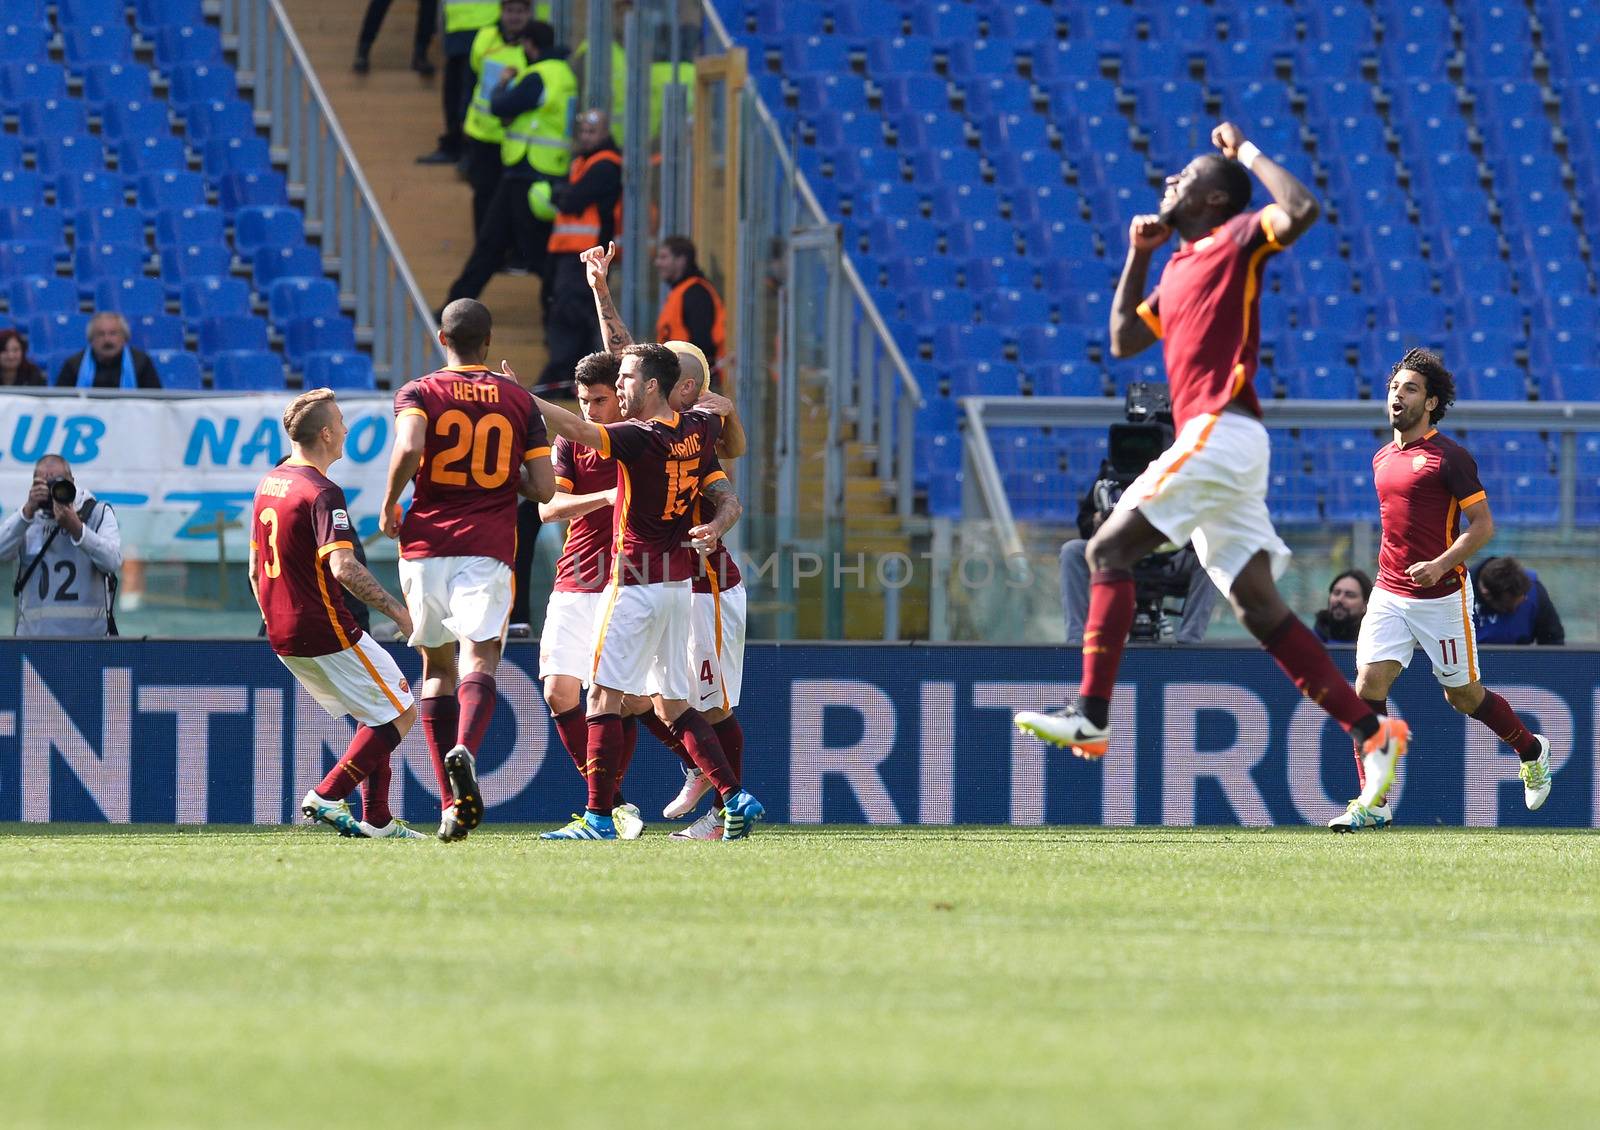 ITALY, Rome: Radja Nainggolan celebrates after scoring a goal 1-0 during the Italian Serie A football match A.S. Roma vs S.S.C. Napoli at the Olympic Stadium in Rome, onn April 25, 2016